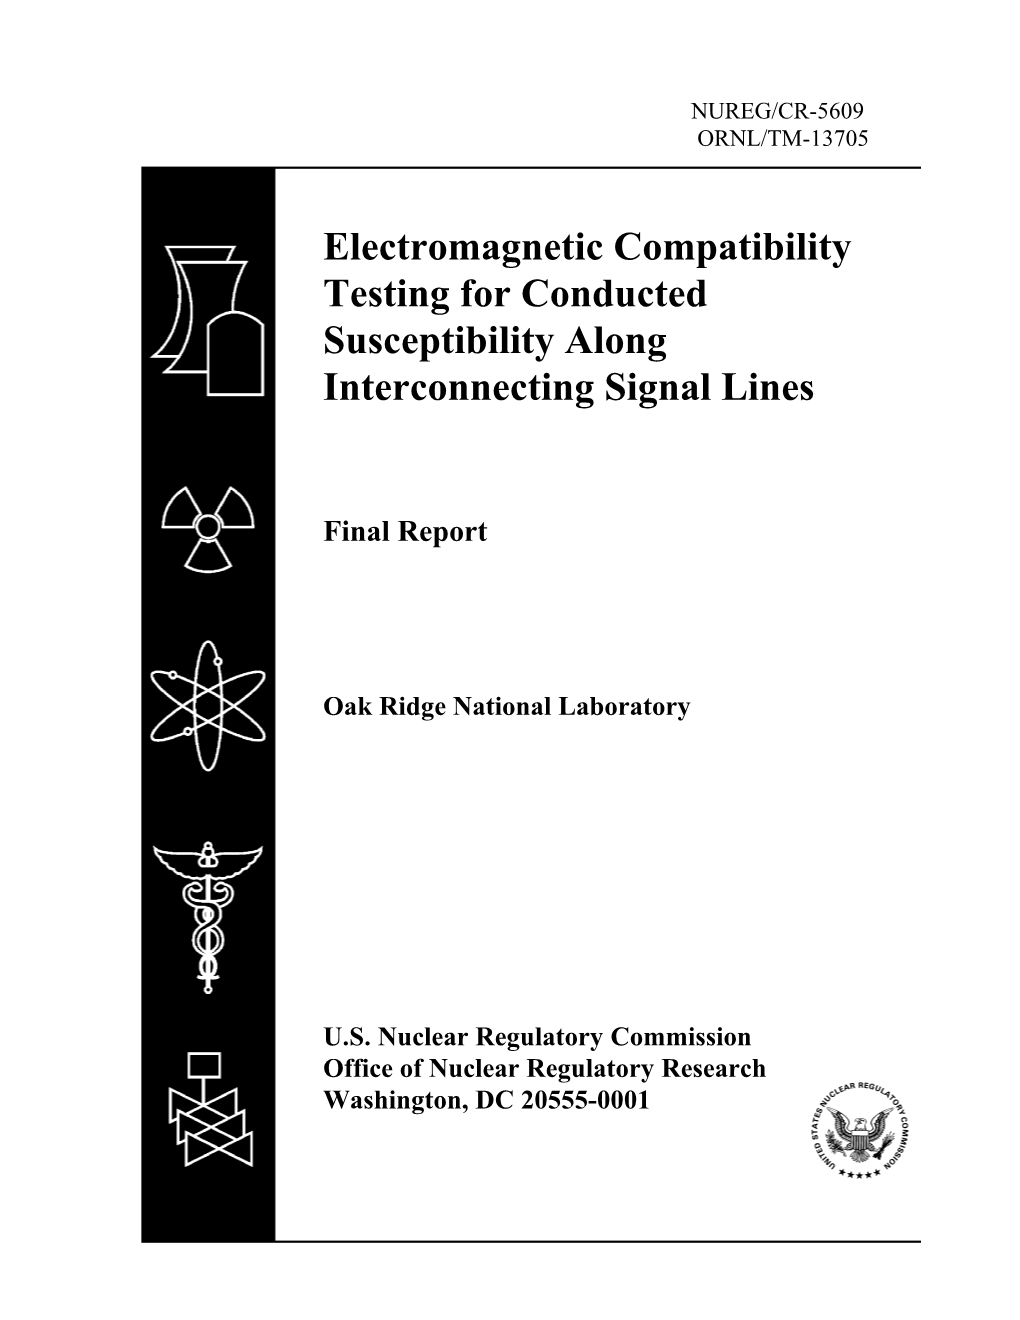 Electromagnetic Compatibility Testing for Conducted Susceptibility Along Interconnecting Signal Lines